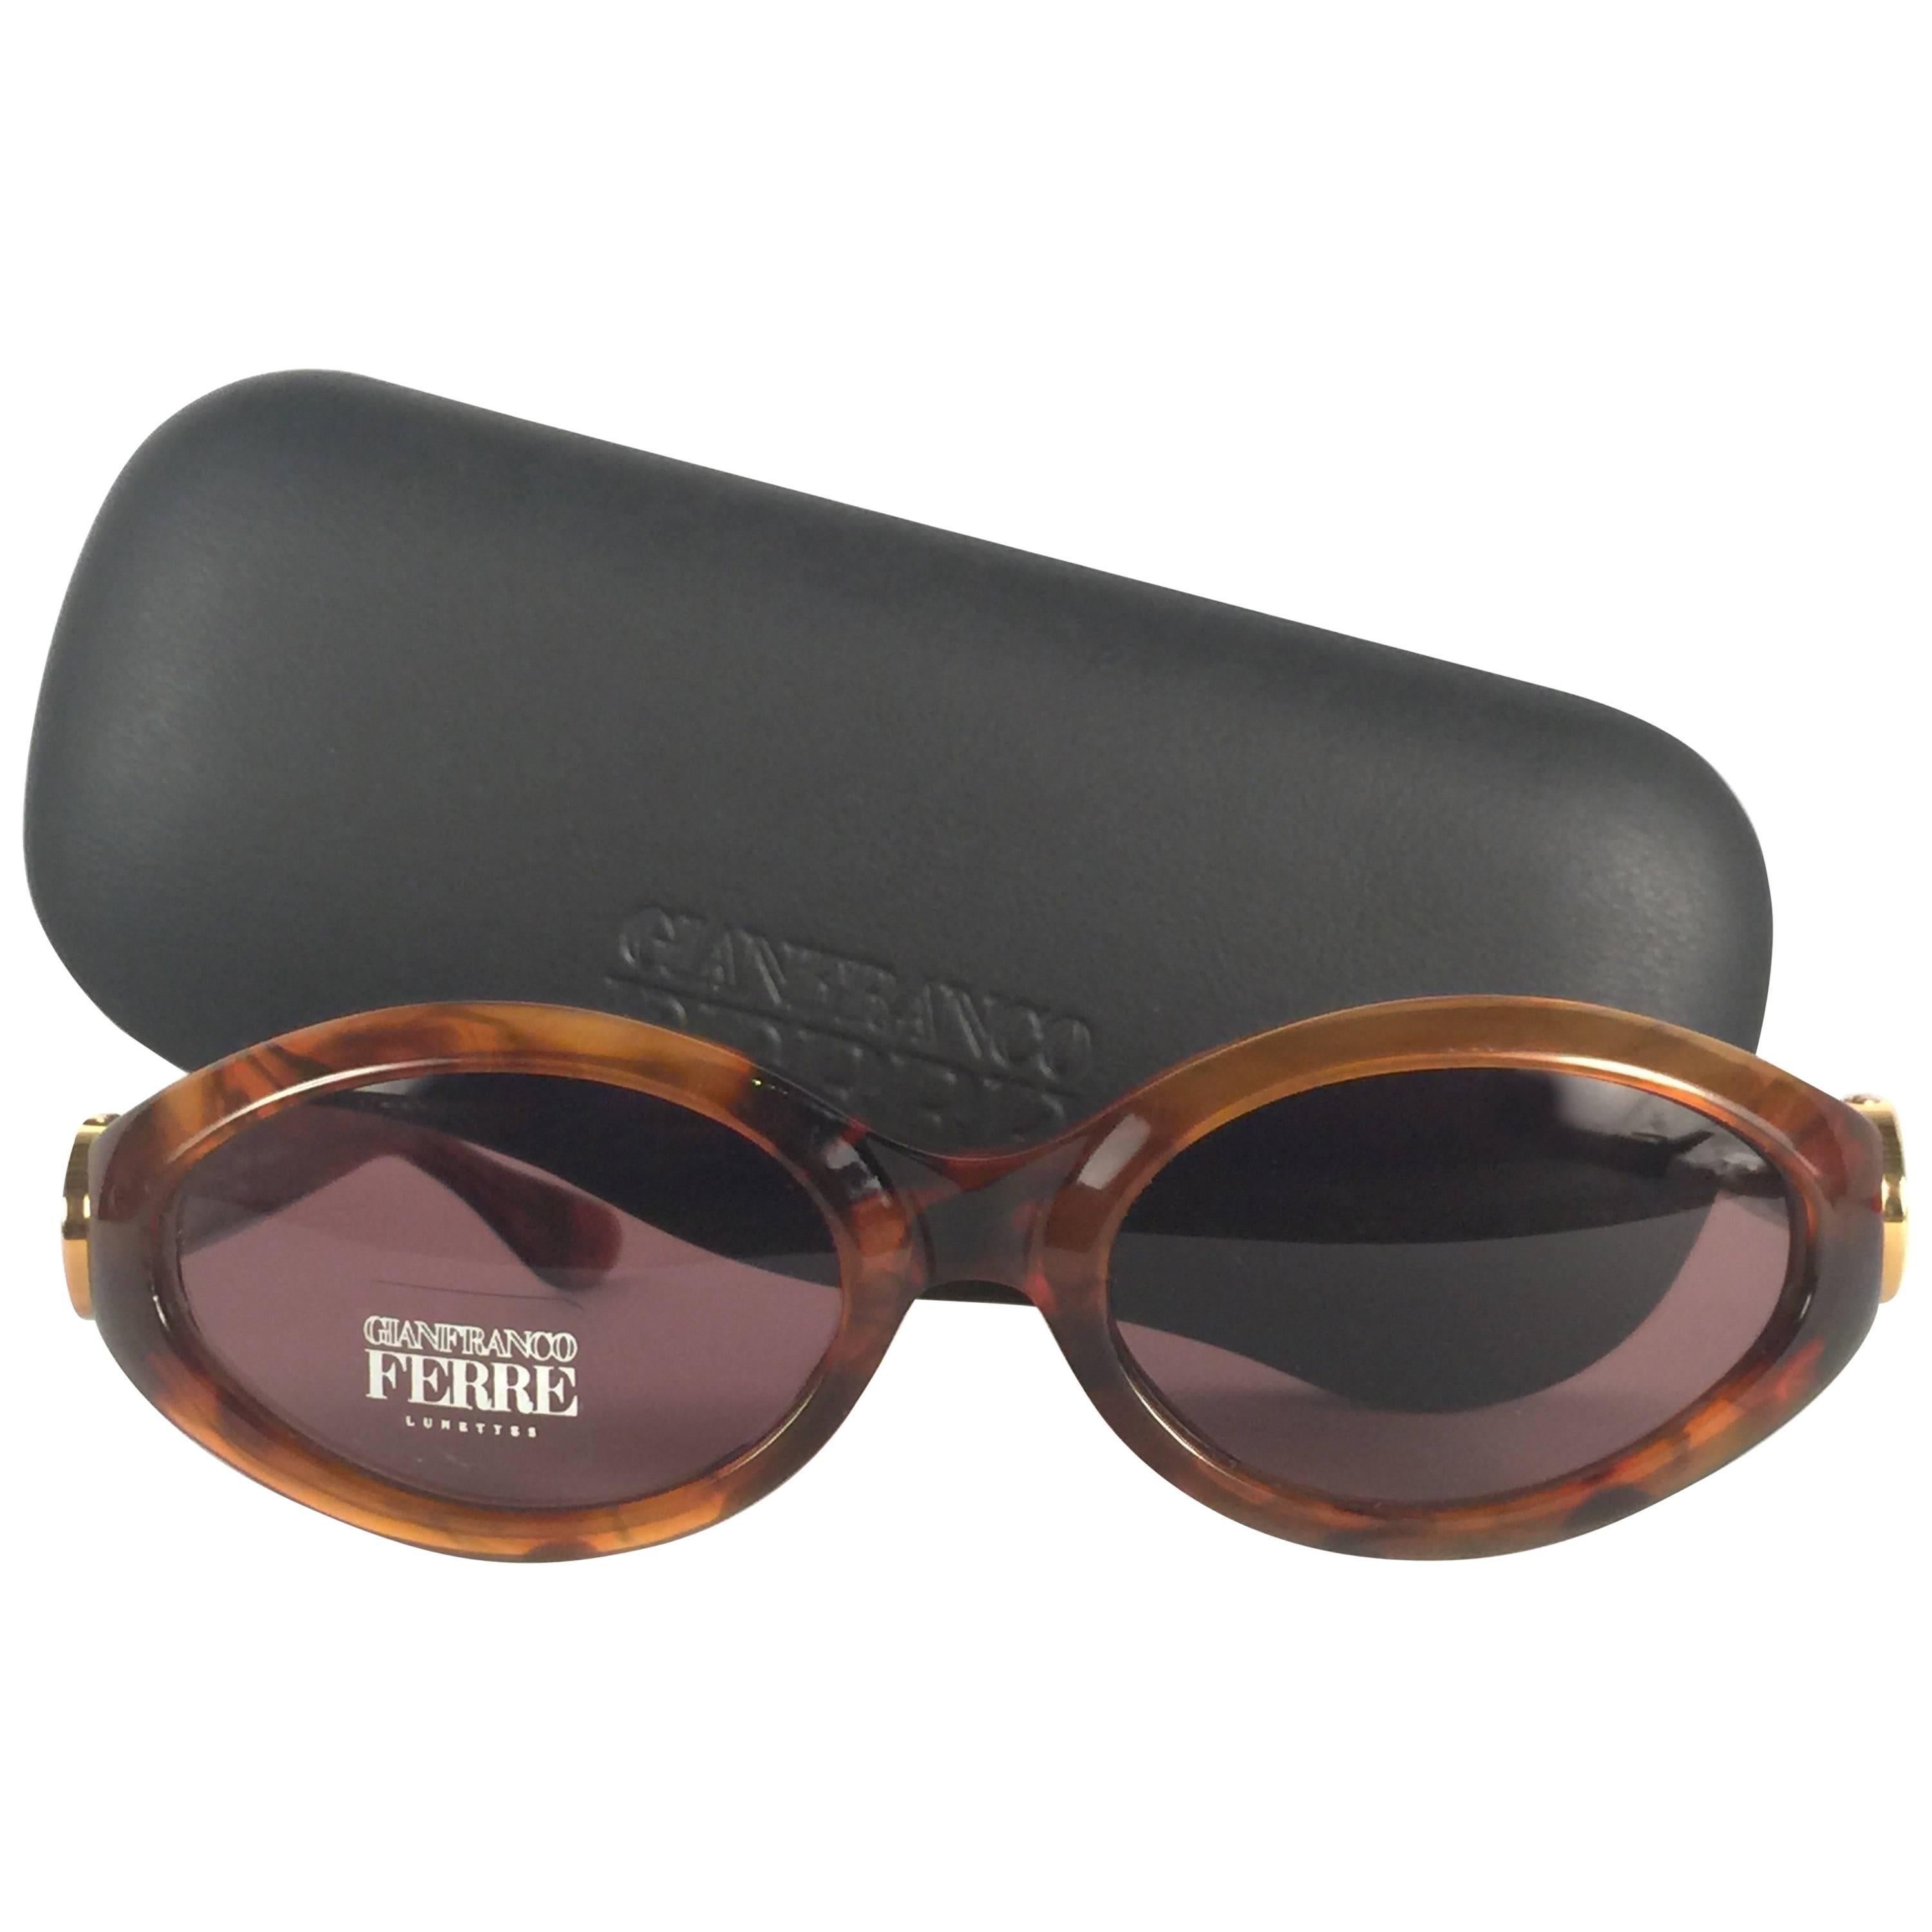 New Vintage Gianfranco Ferré Tortoise 1990's Made in Italy Sunglasses For Sale